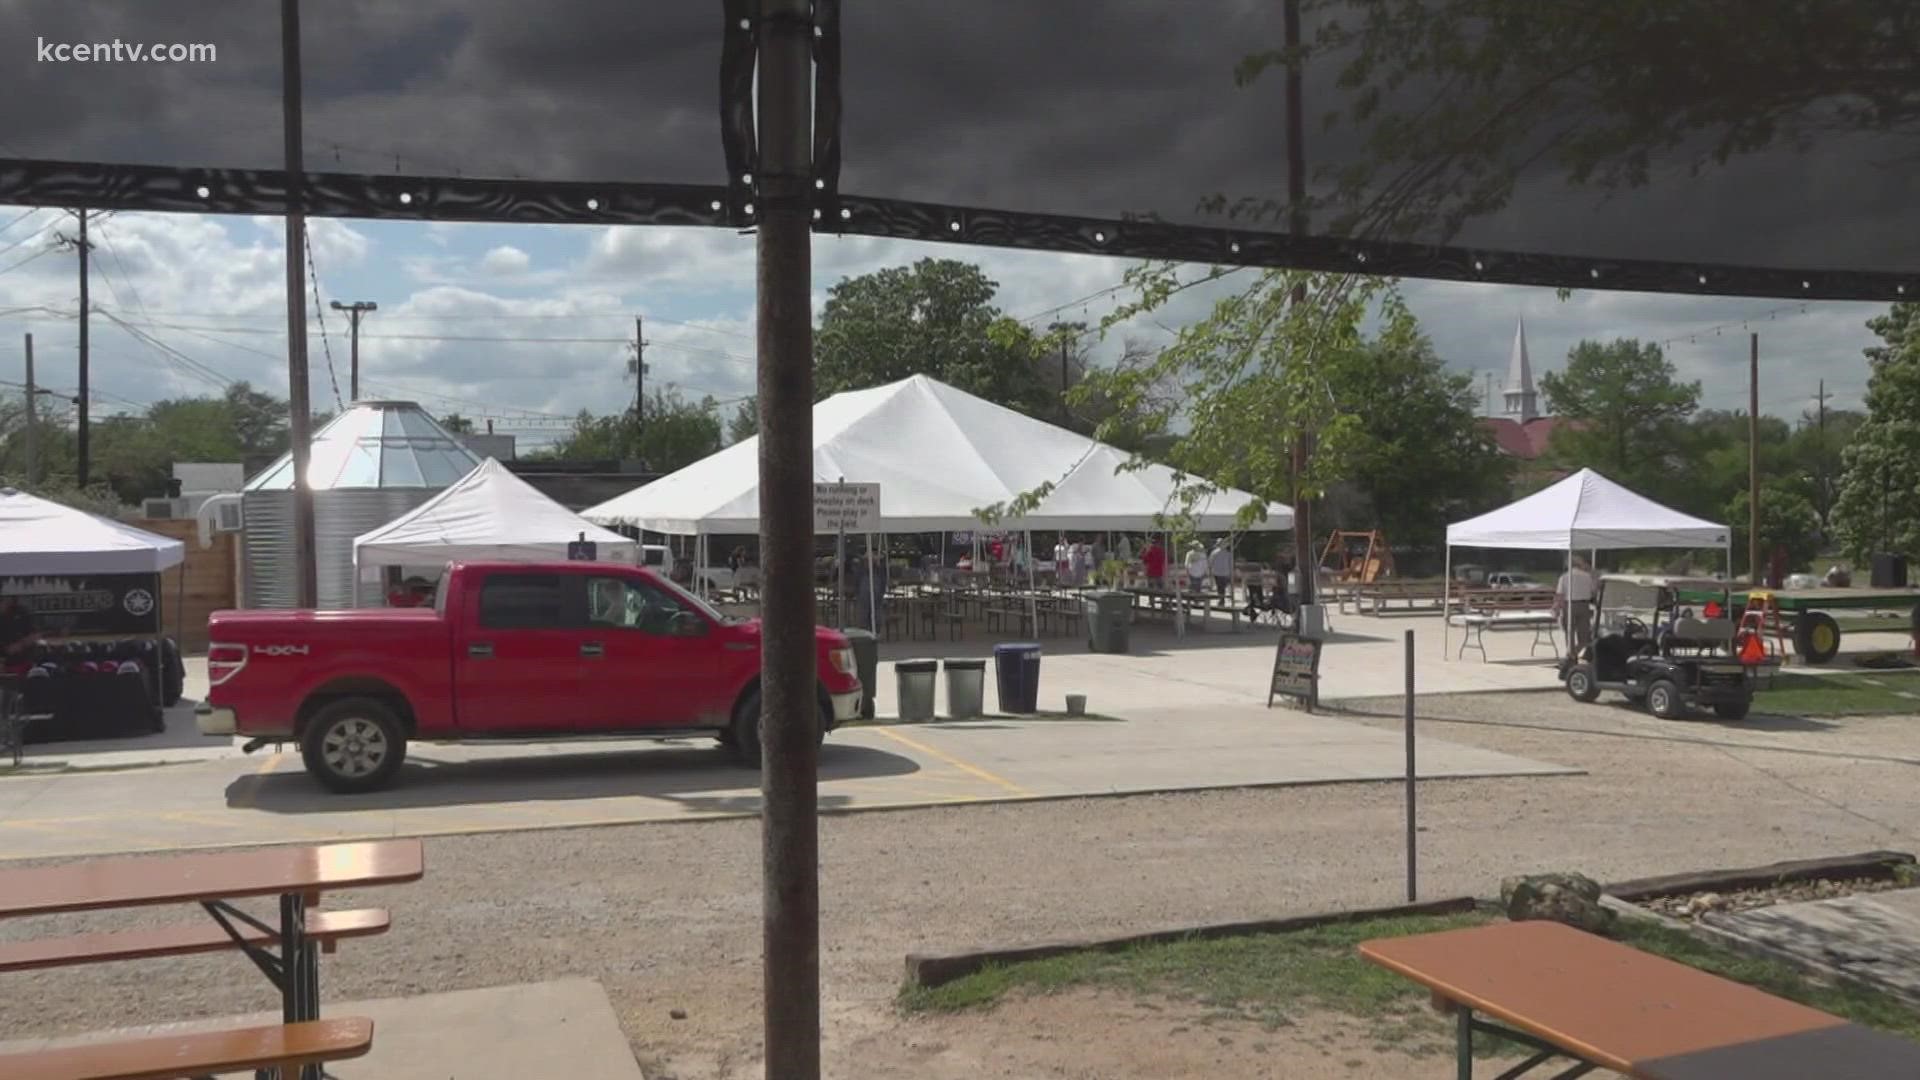 Salado is hosting a benefit festival that will go towards helping a family who faced serious damage during the storm.